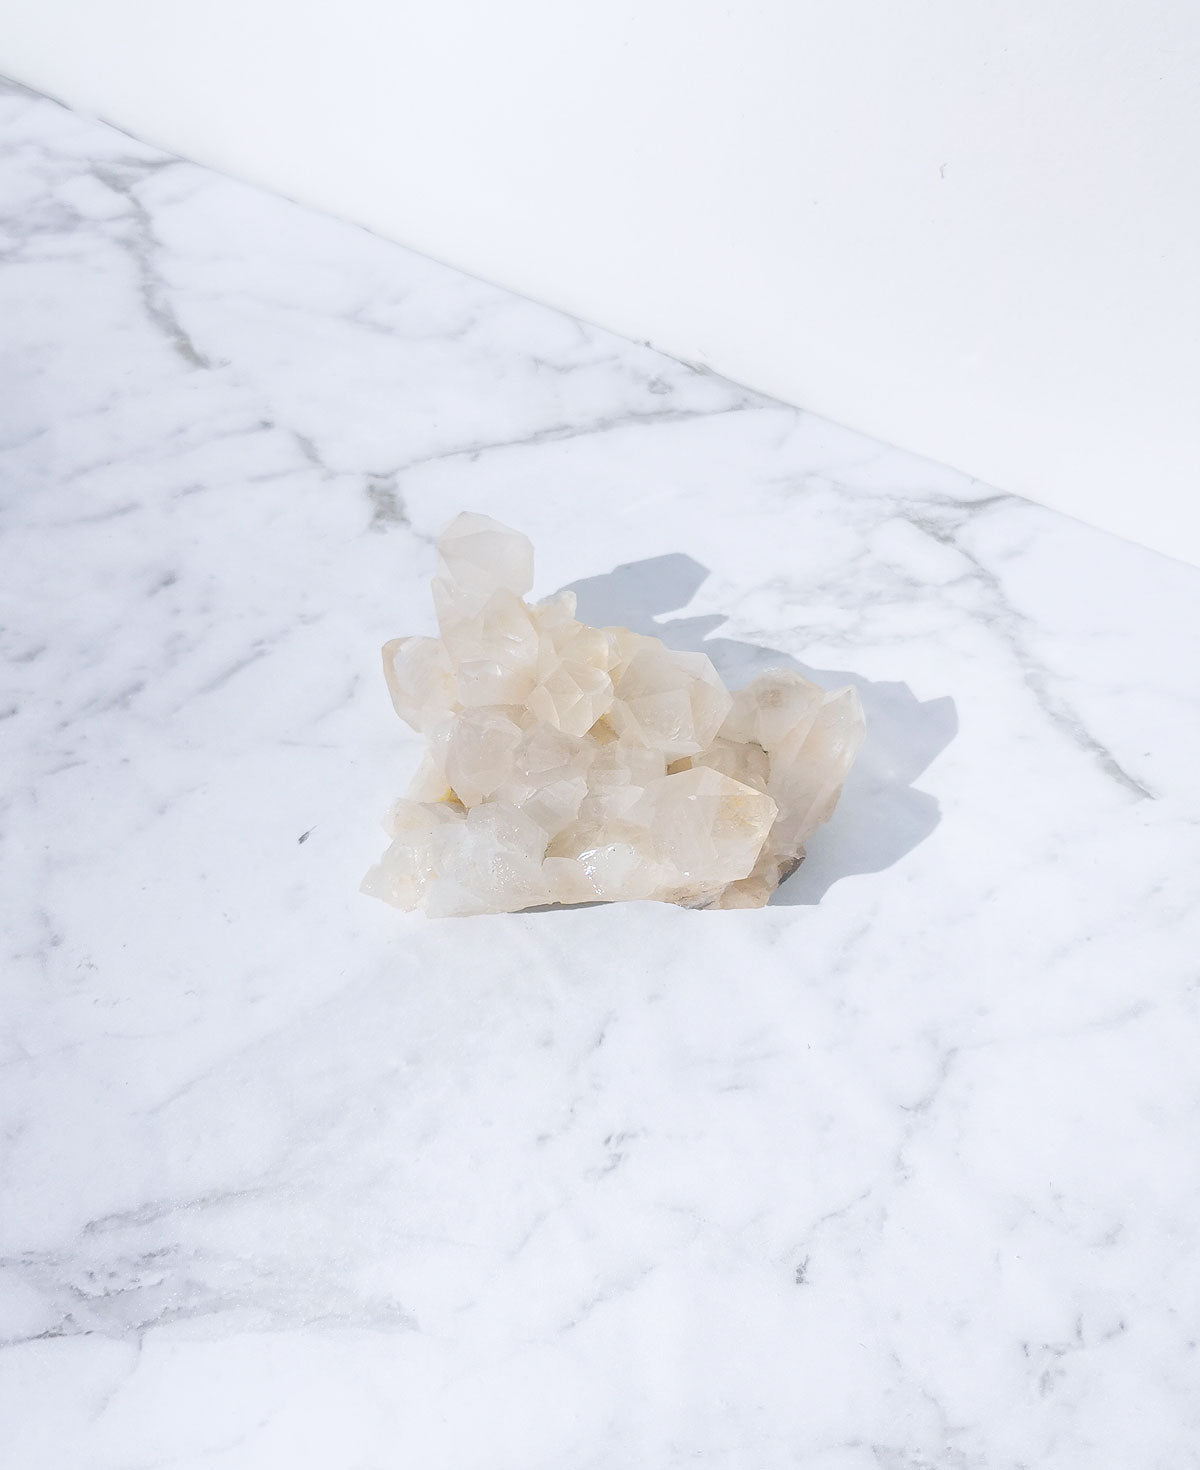 Himalayan Quartz - Cluster (this one)